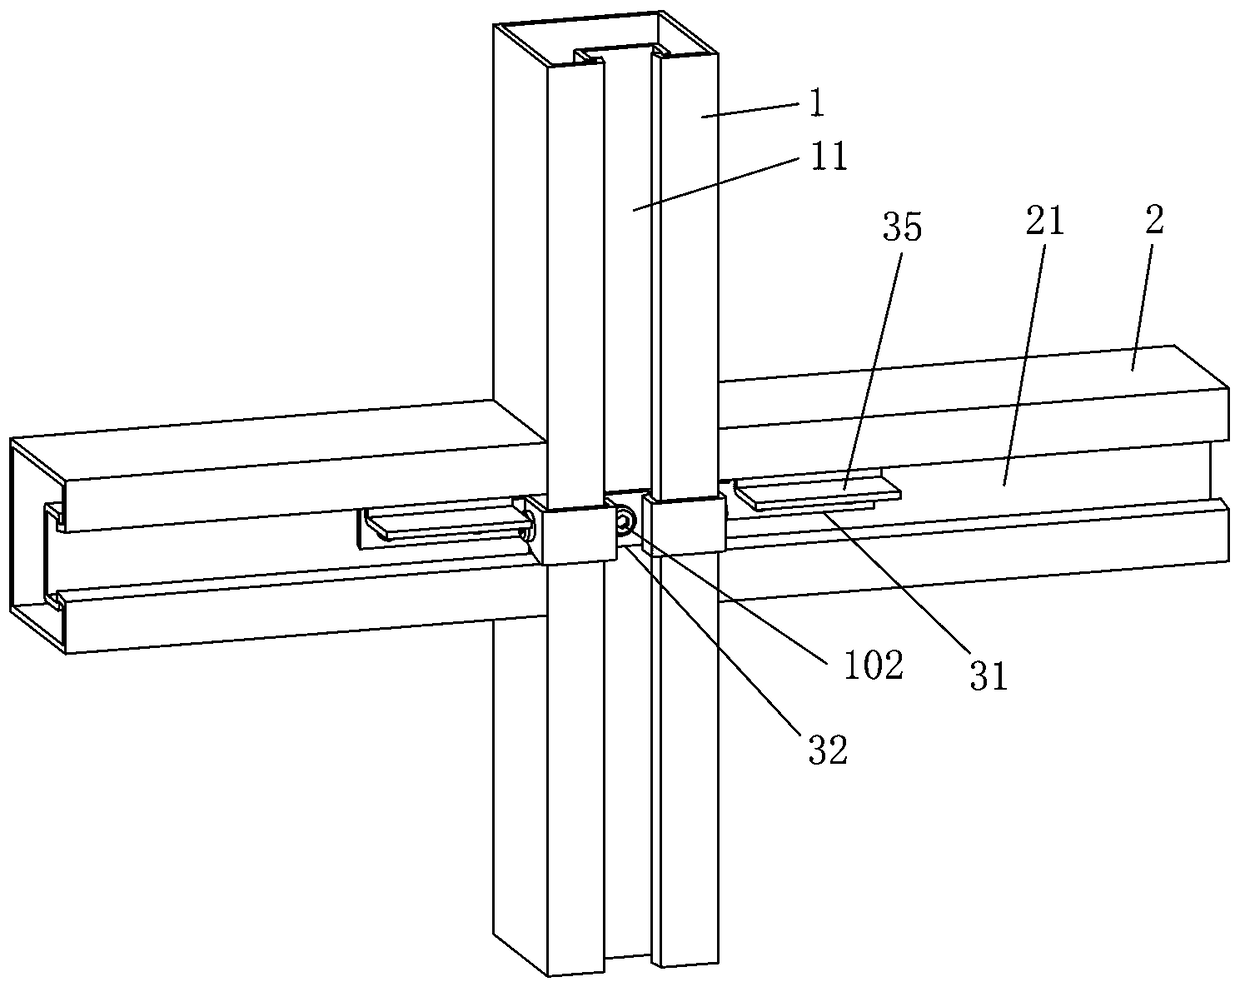 Curtain wall keel connection structure